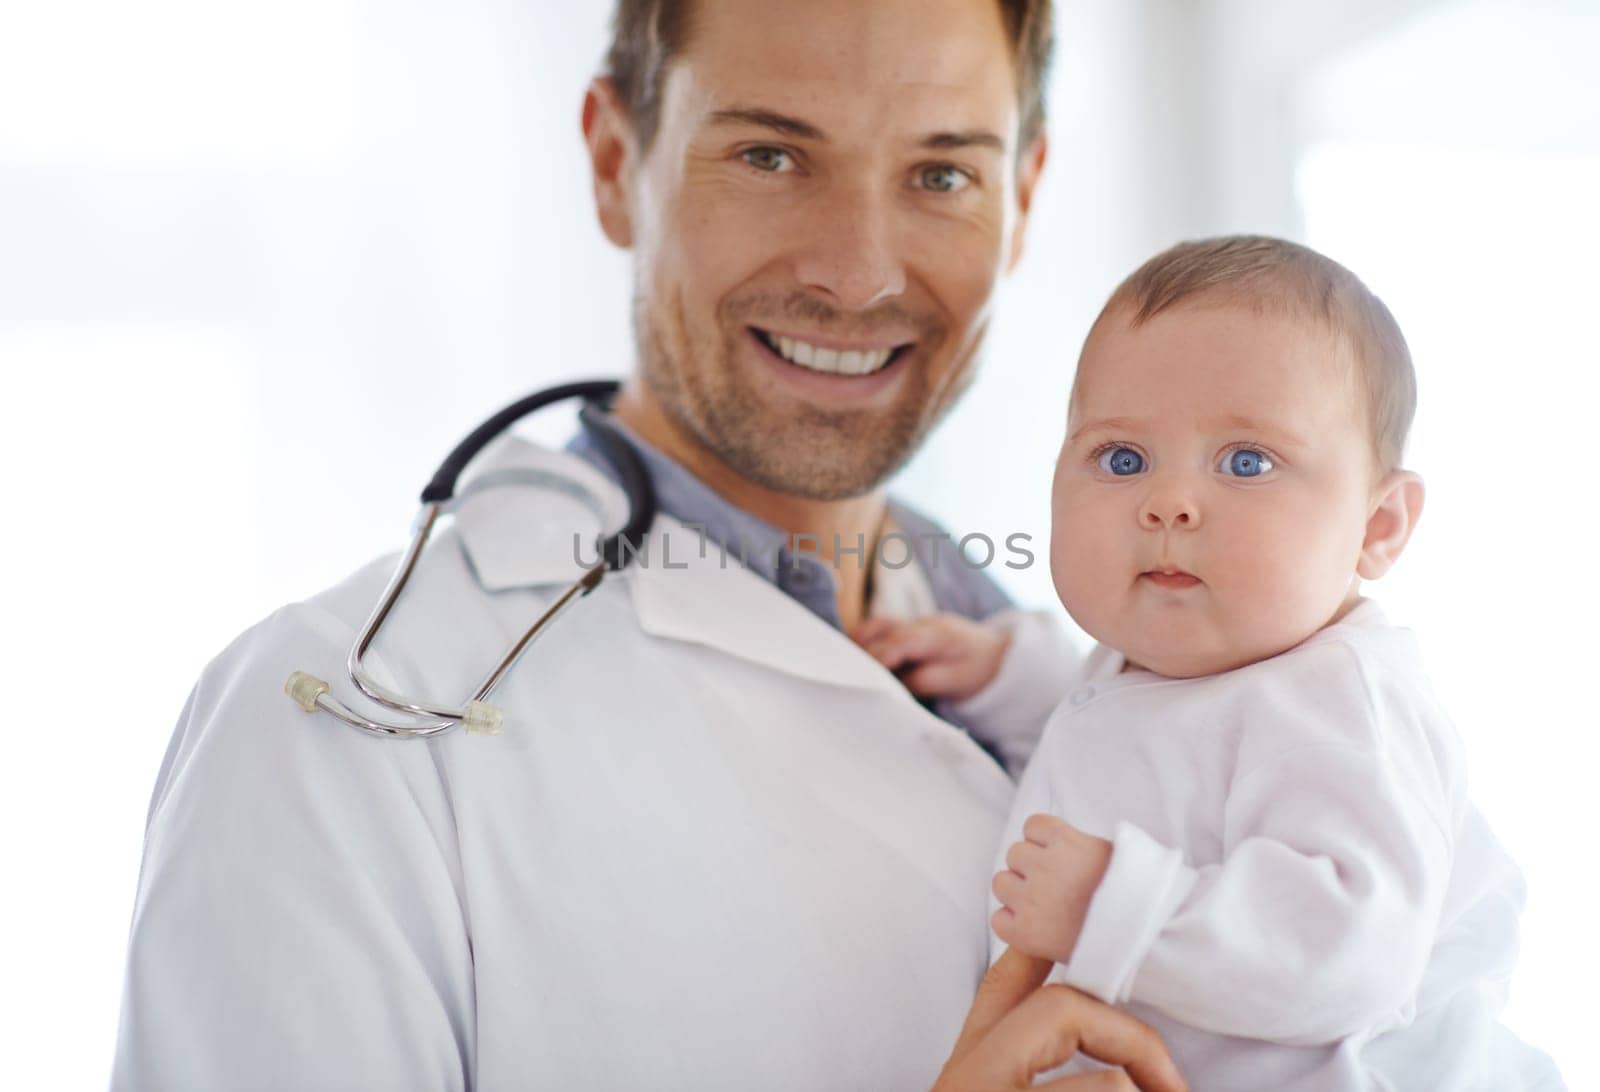 Portrait, happy man and pediatrician with baby for hospital assessment, medical support and growth. Pediatrics doctor holding newborn kid in clinic for healthcare service, trust and helping children.